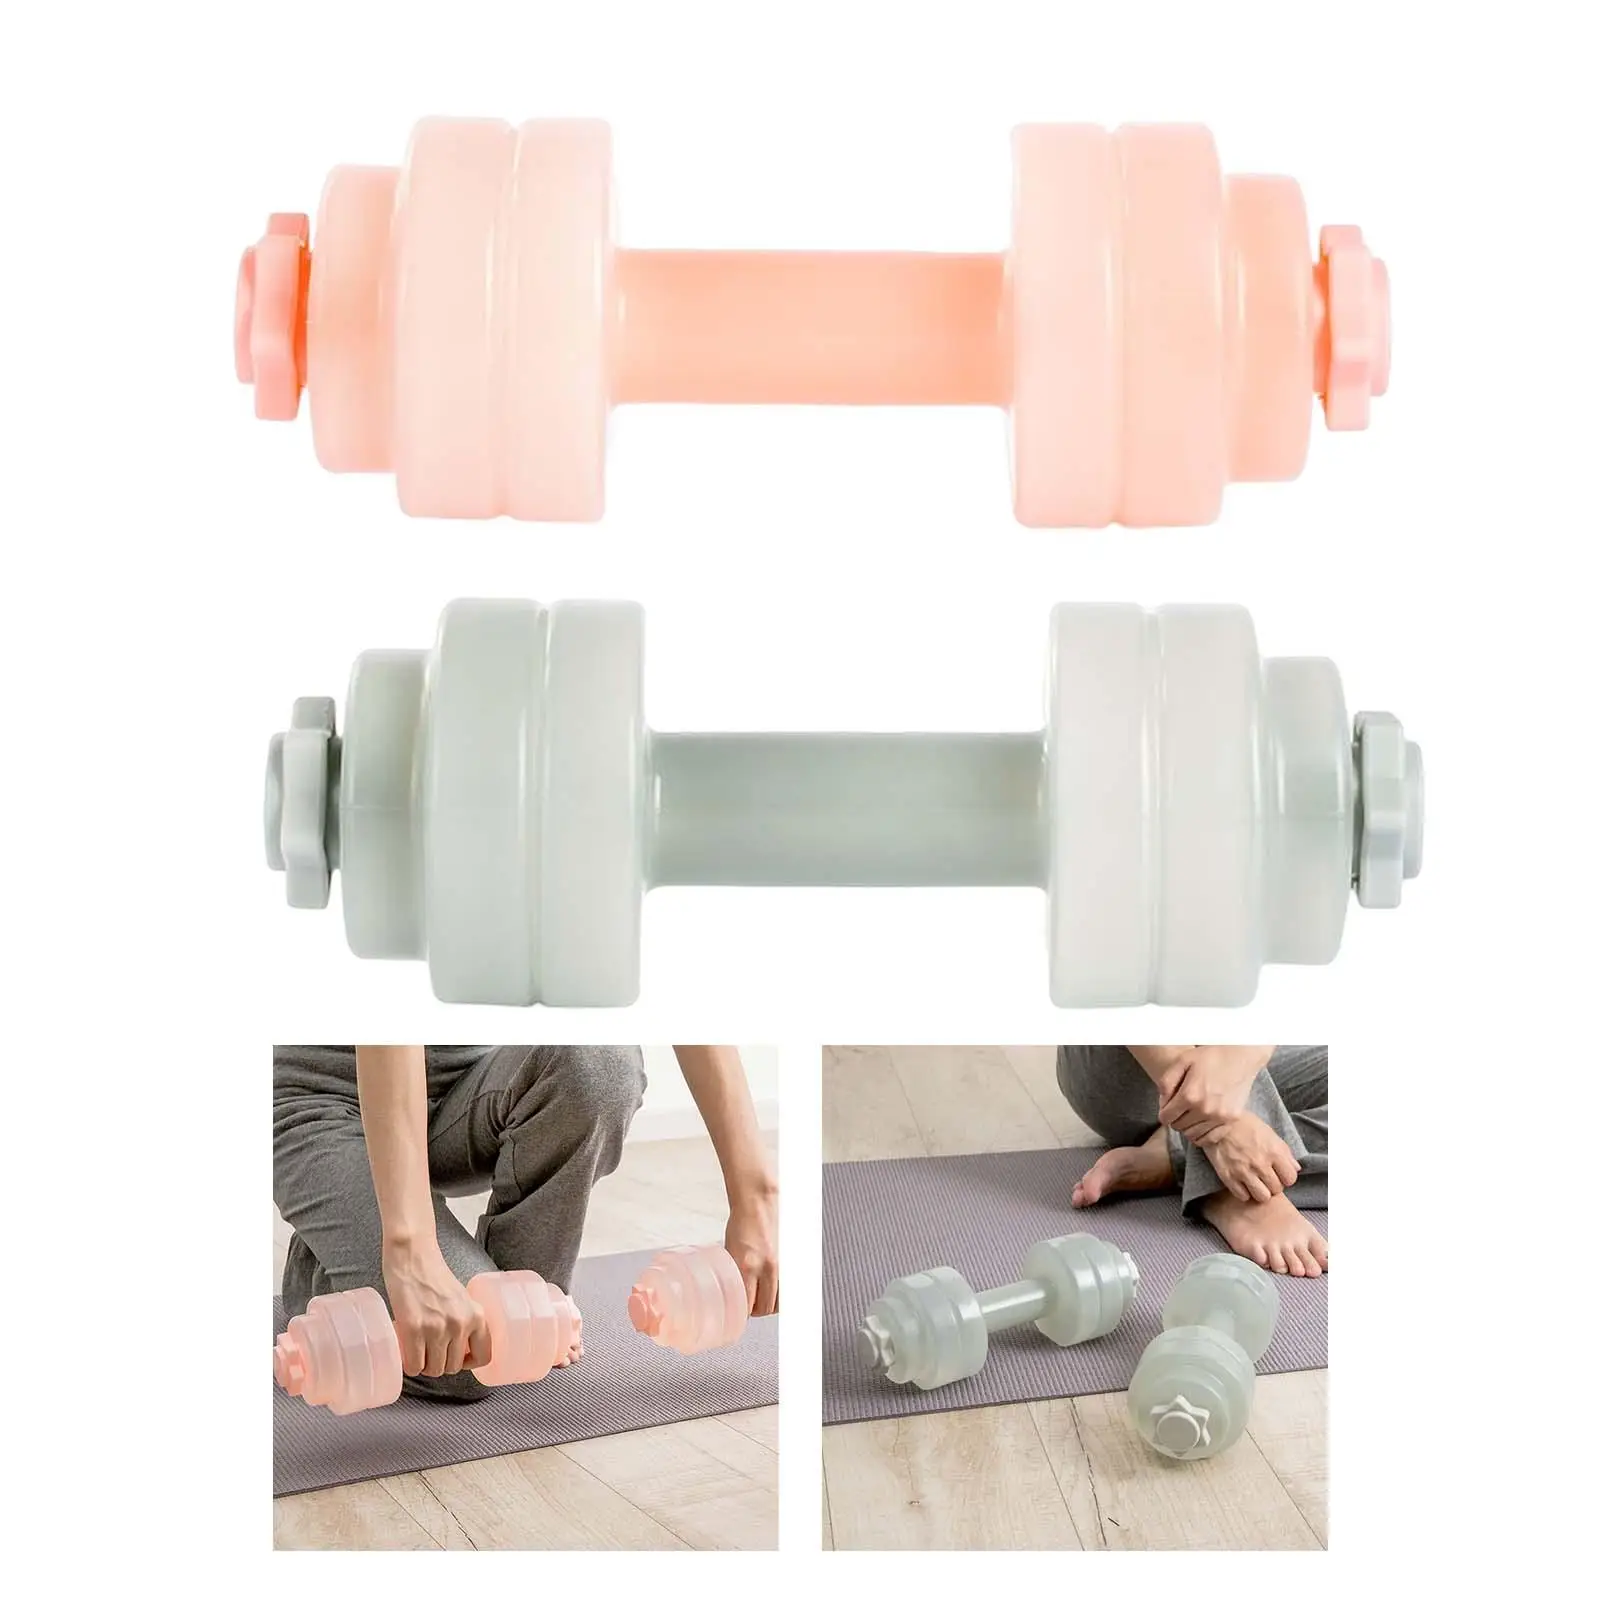 2.2lb Water Filled Dumbbell Water Dumbbells Weights, Portable Body Building Office